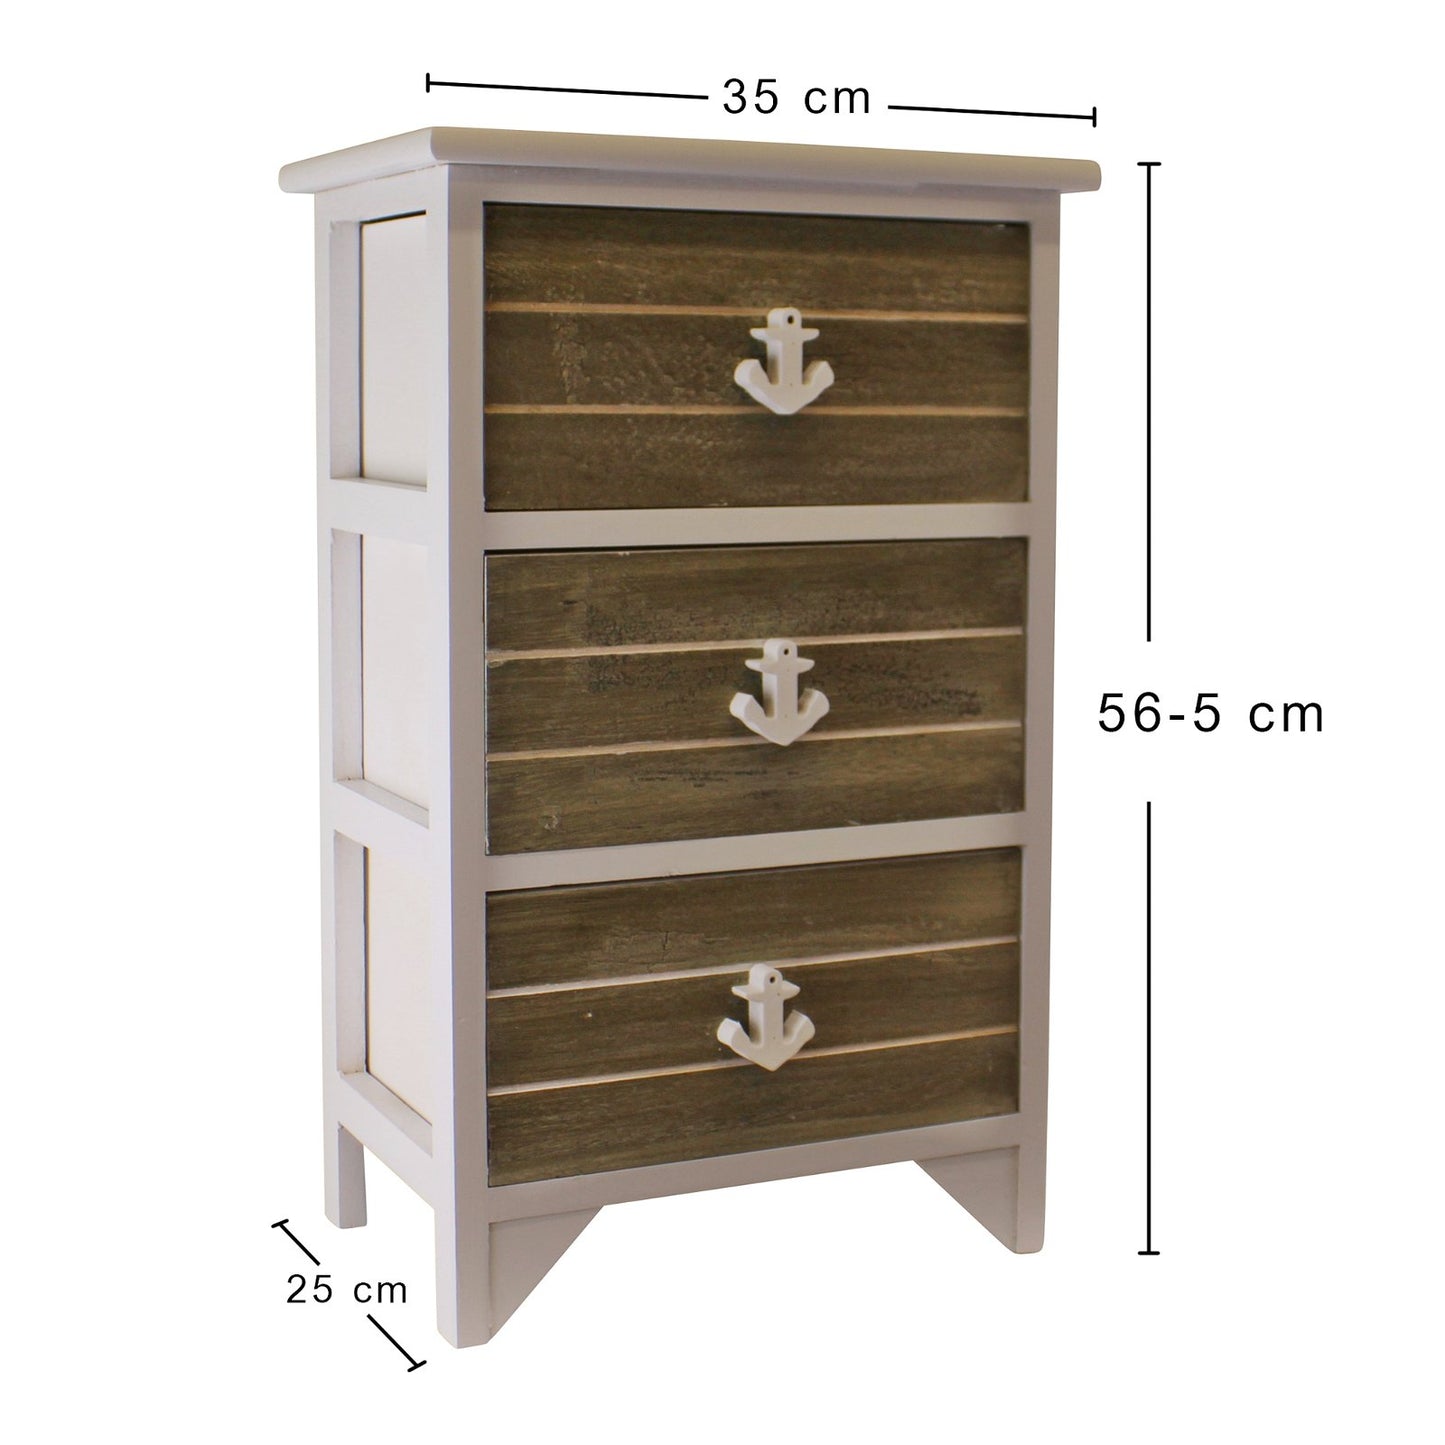 Chest Of 3 Drawers With Nautical Anchor Handles In Grey & White